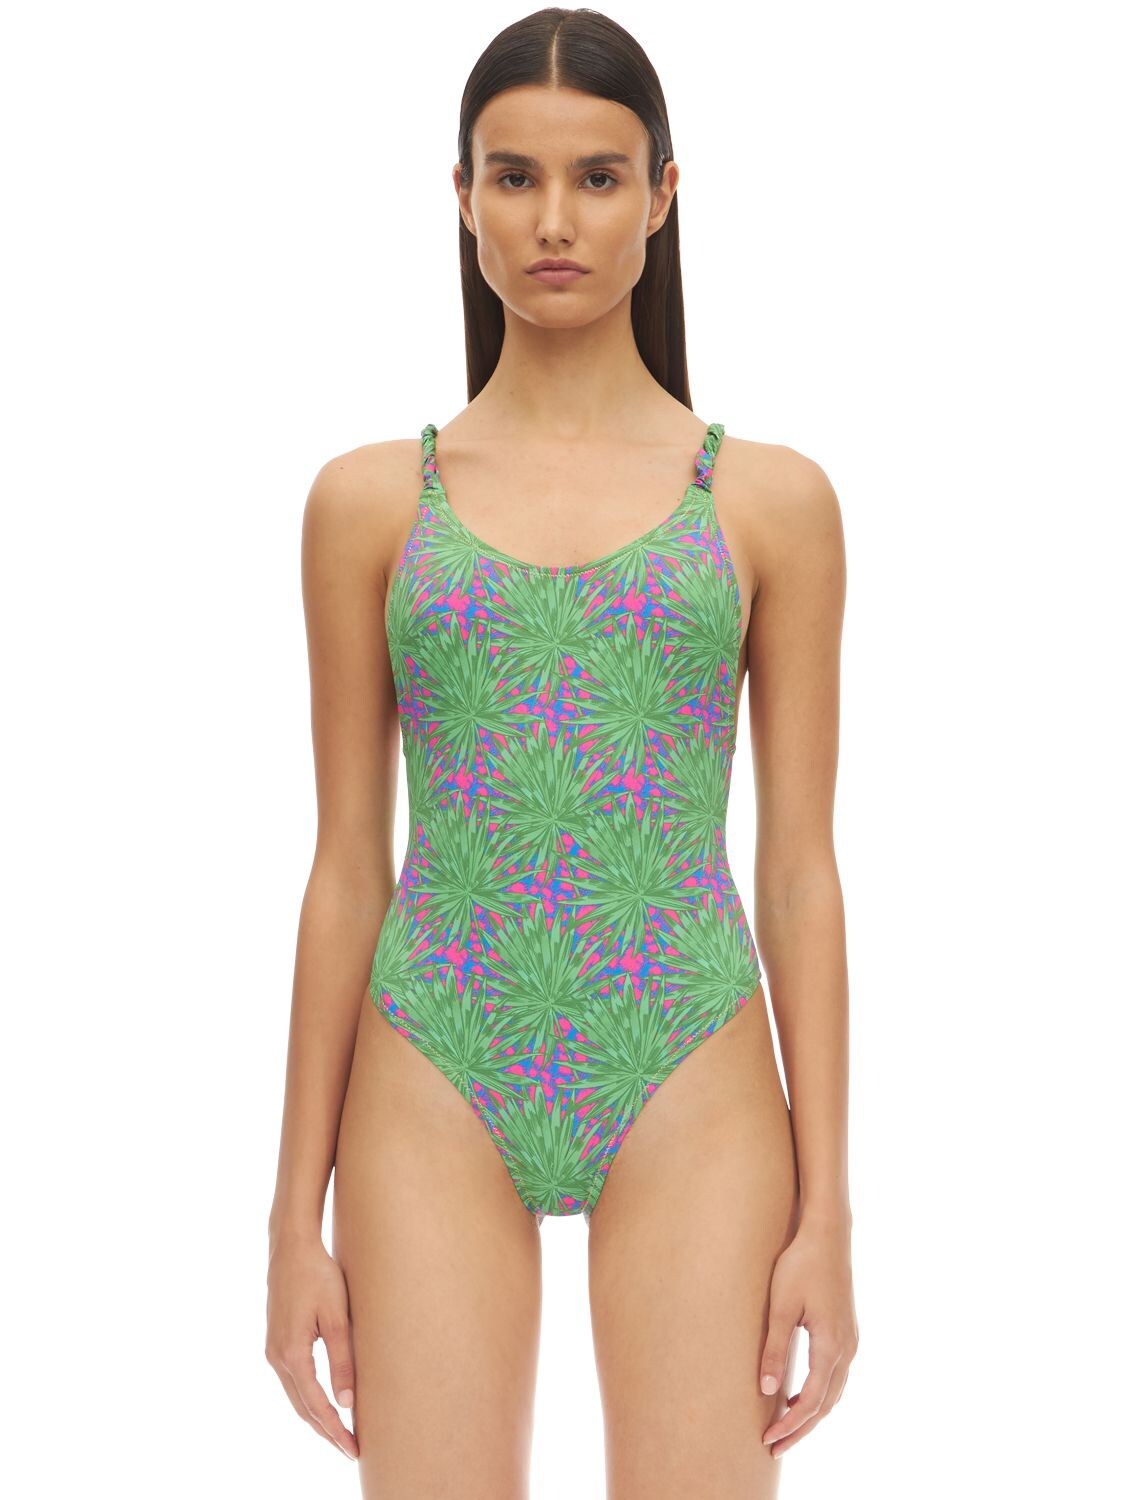 Valencini Printed One Piece Swimsuit